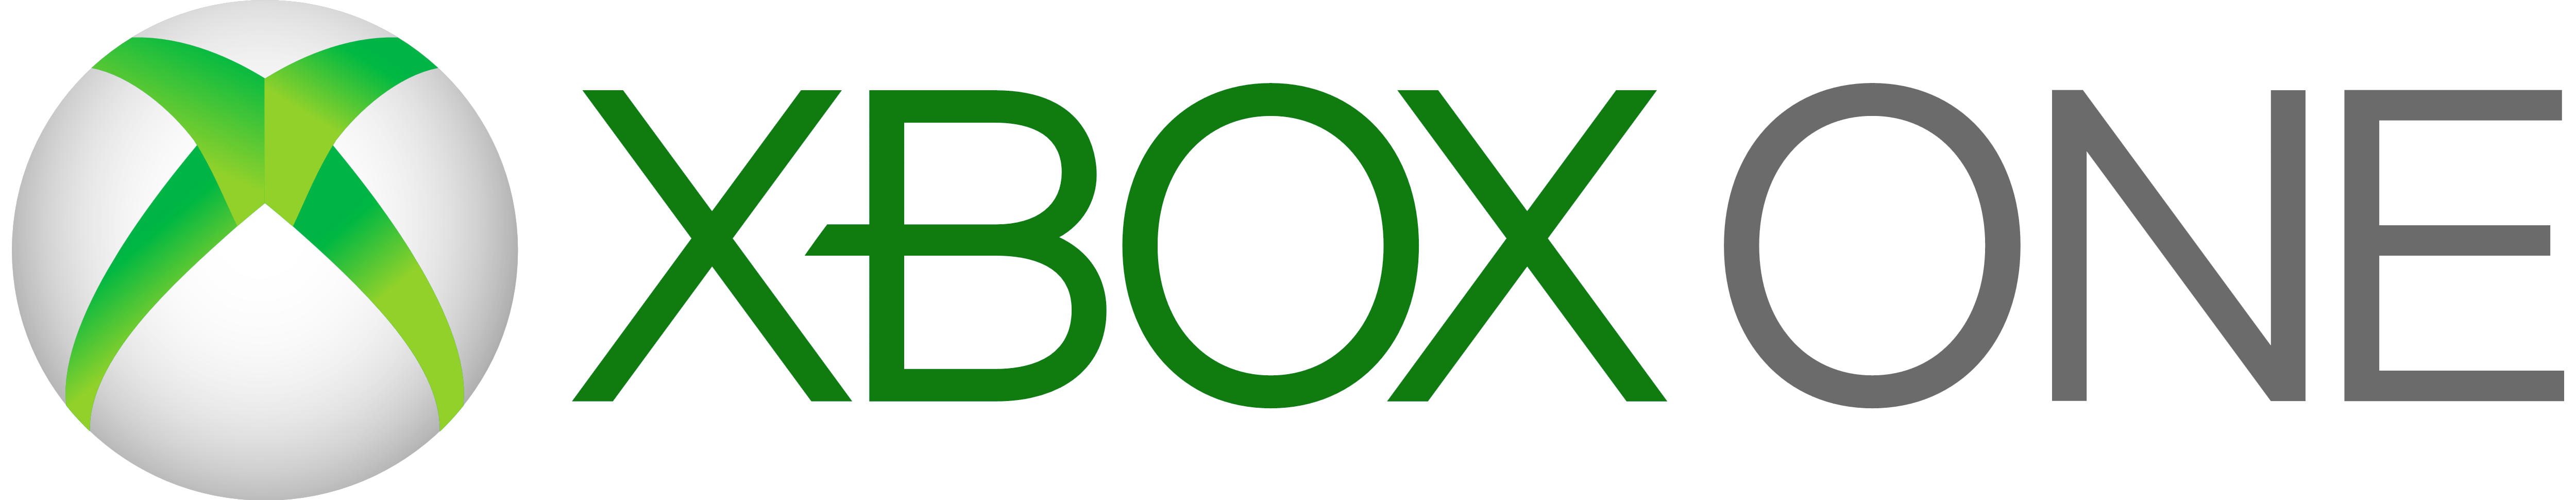 Xbox One Logos Download